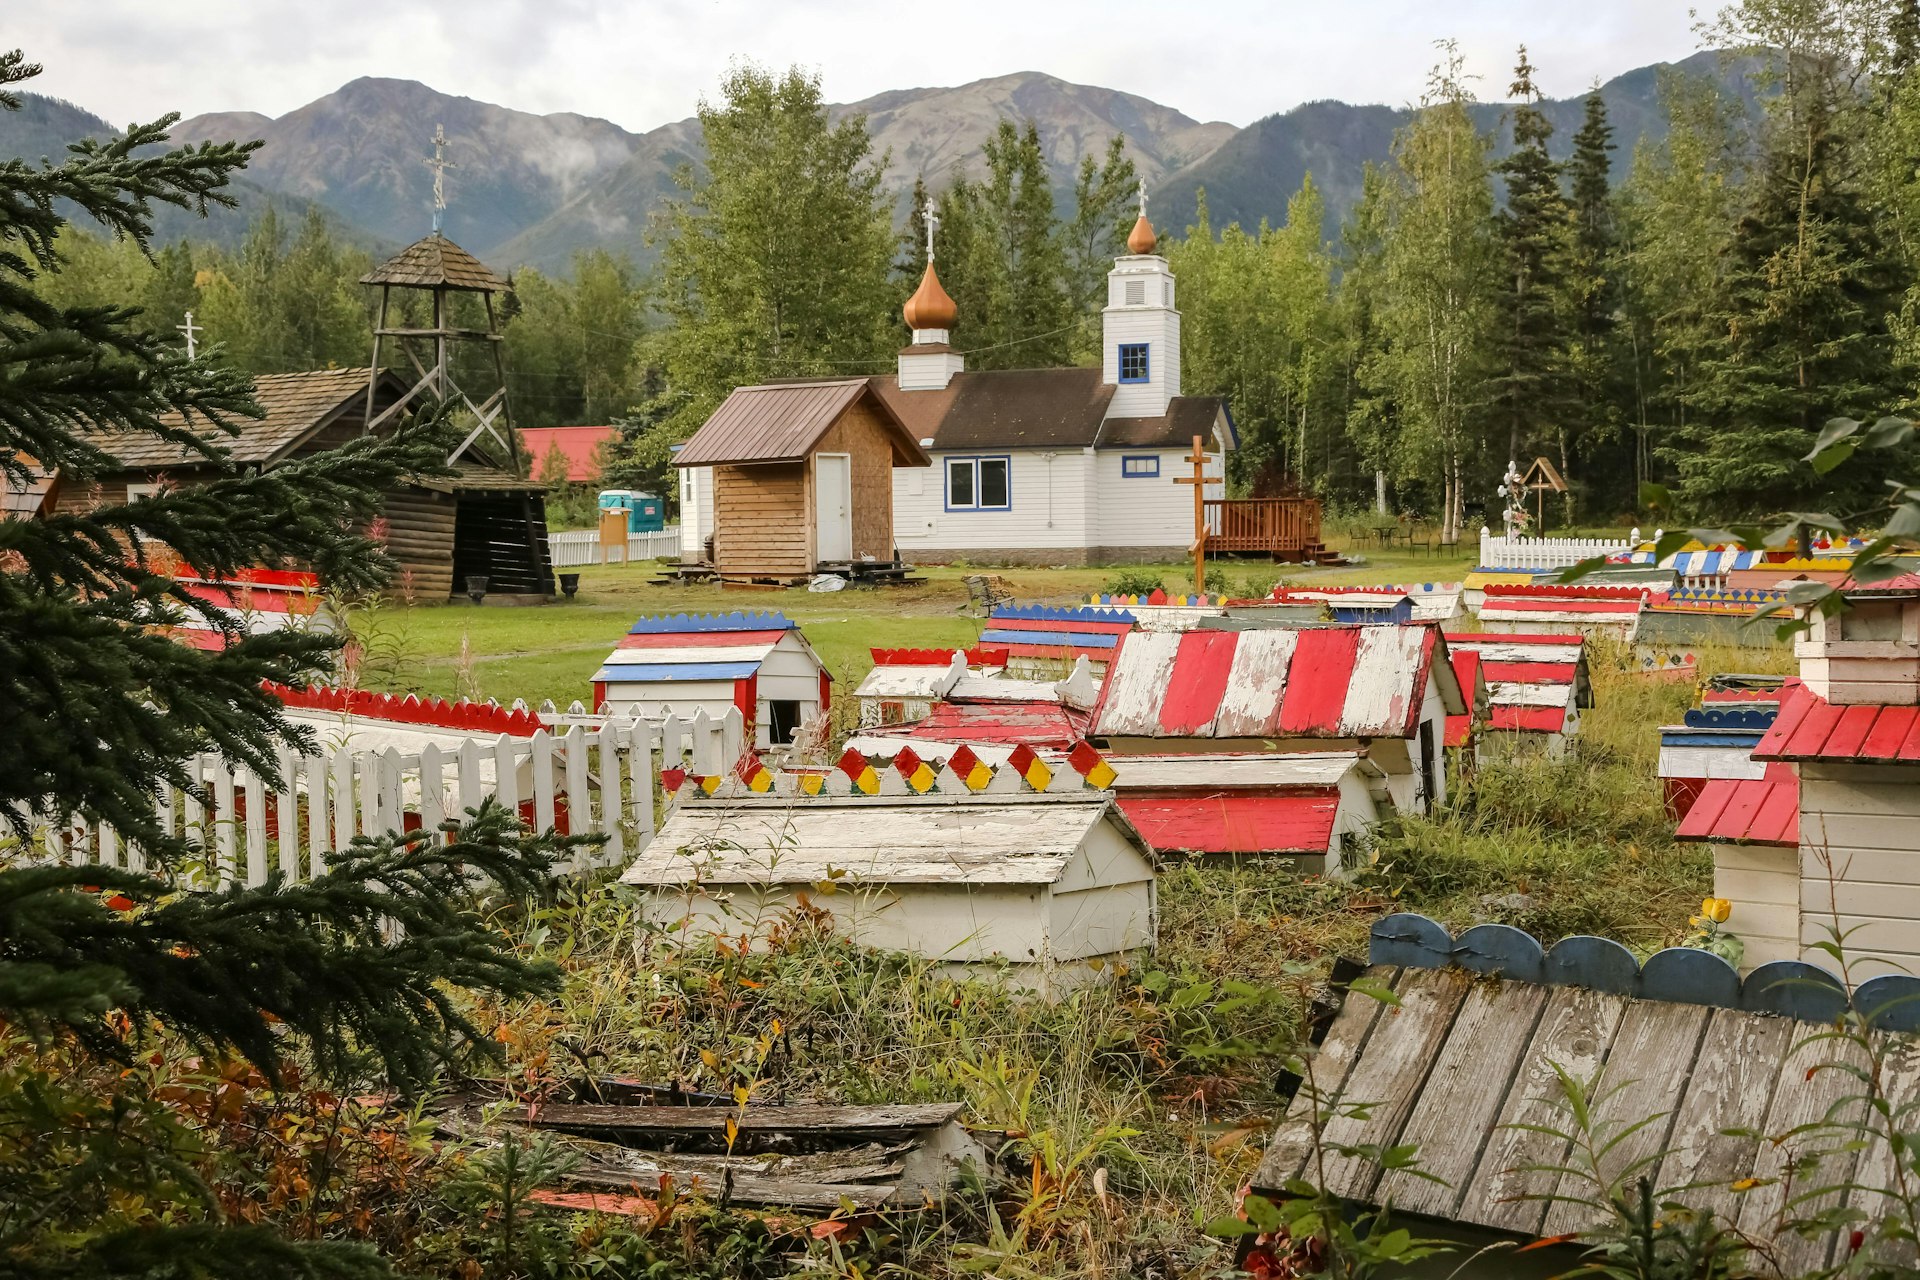 Russian-orthodox Eklutna Cemetery with its colorful graves and spirit houses, Alaska. Image shot 07/2017. Exact date unknown.